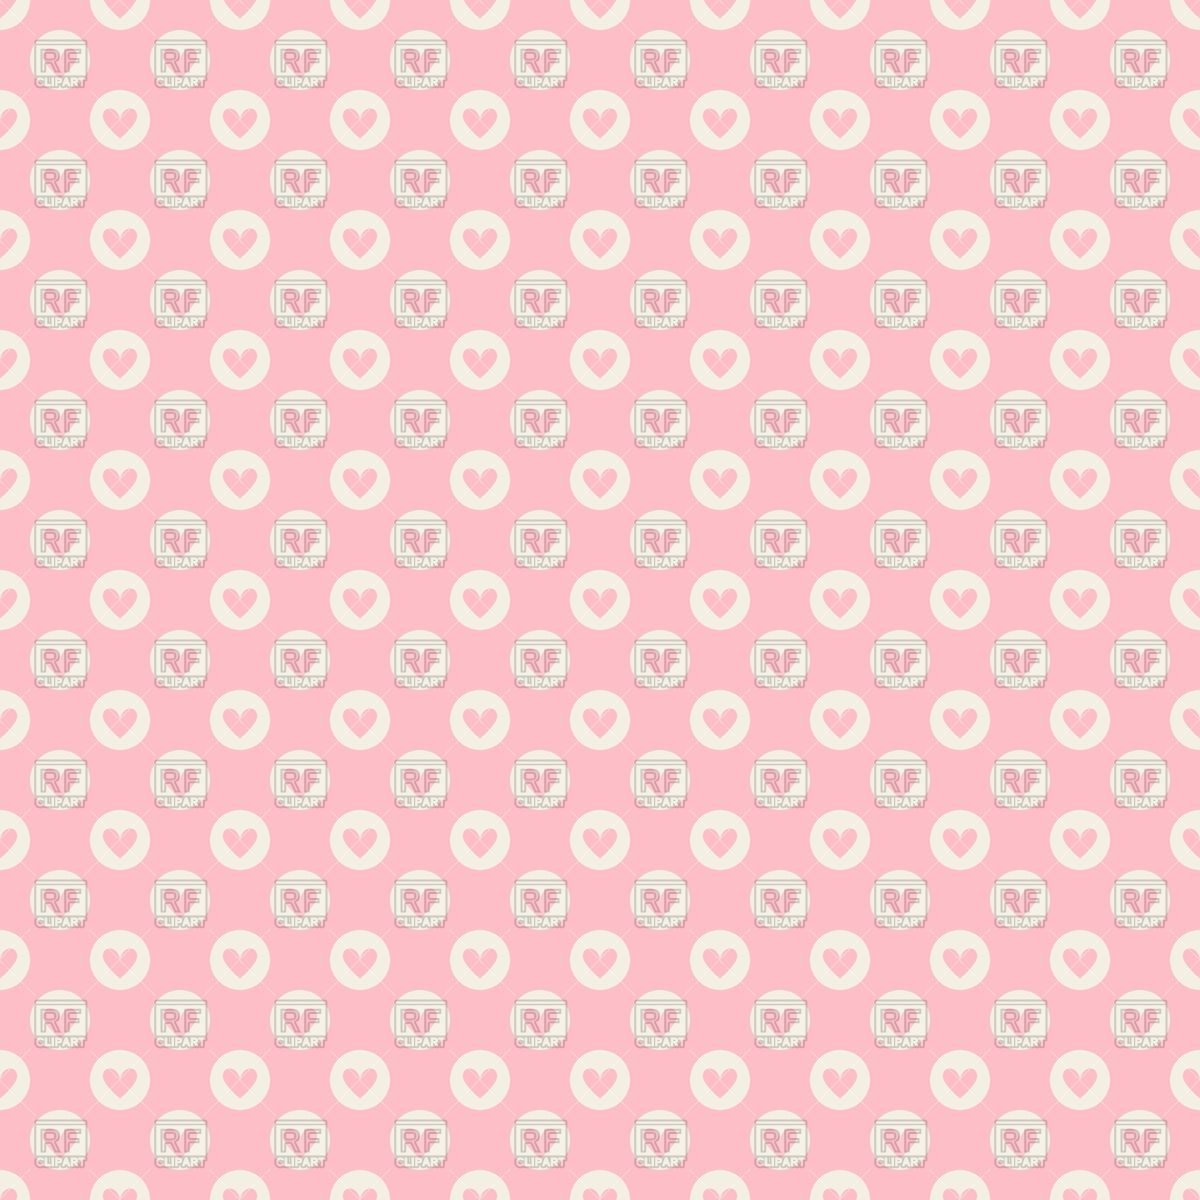 Valentines background with red hearts Royalty Free Vector